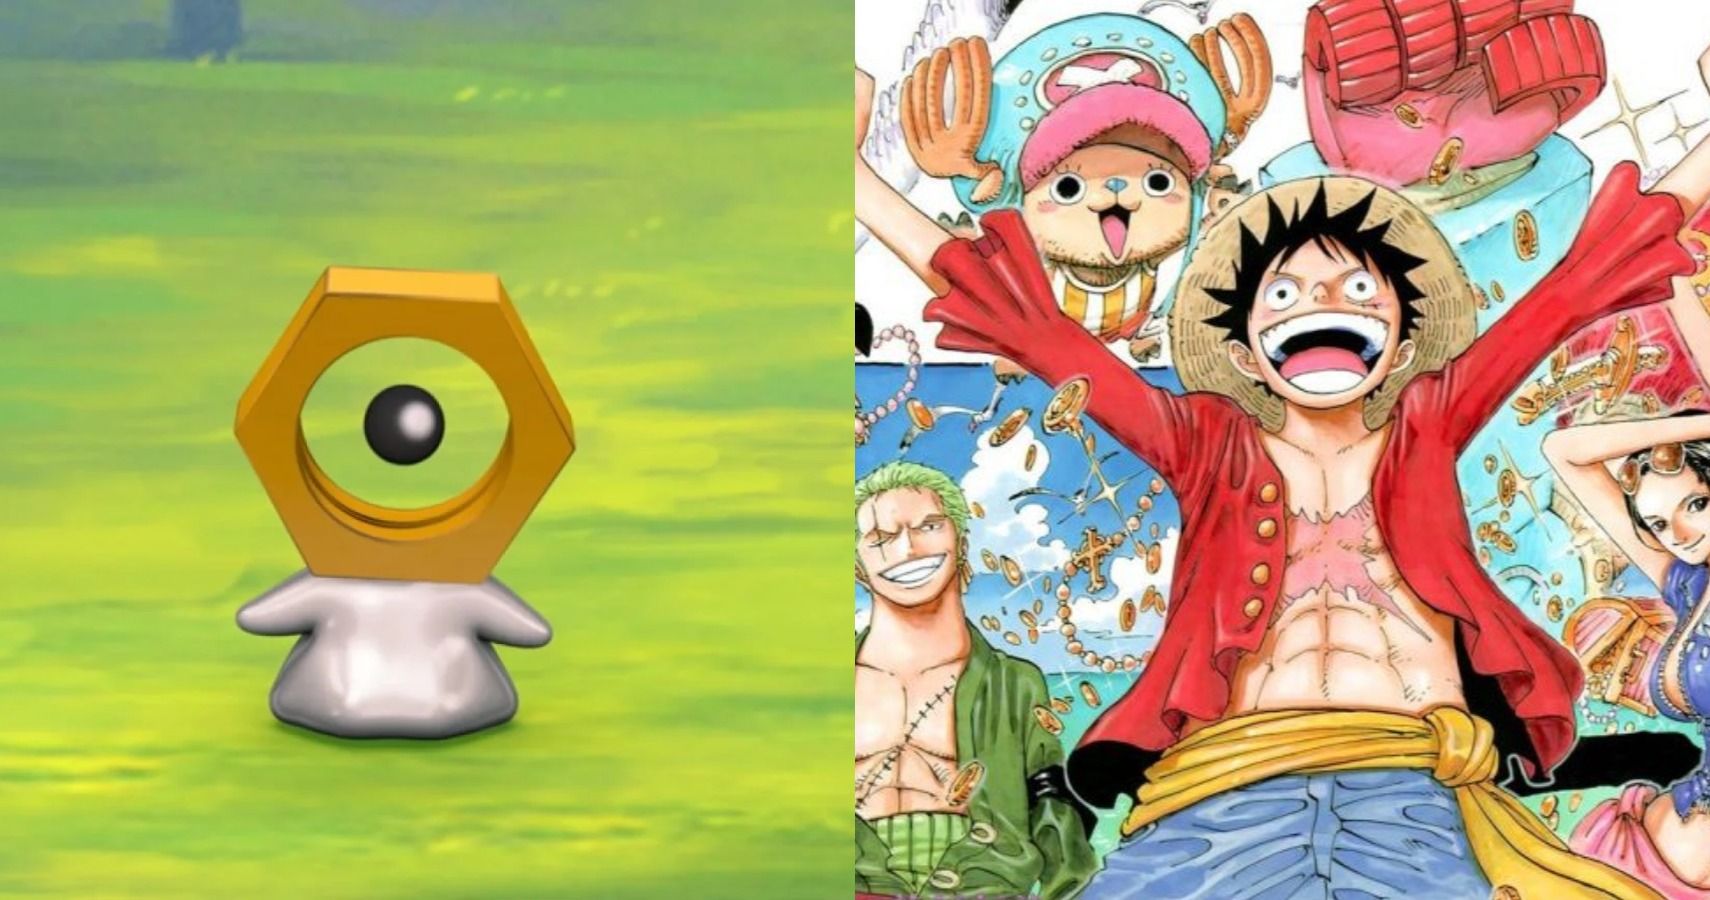 One Piece Creator Admits Pokemon Is Canon In the Series